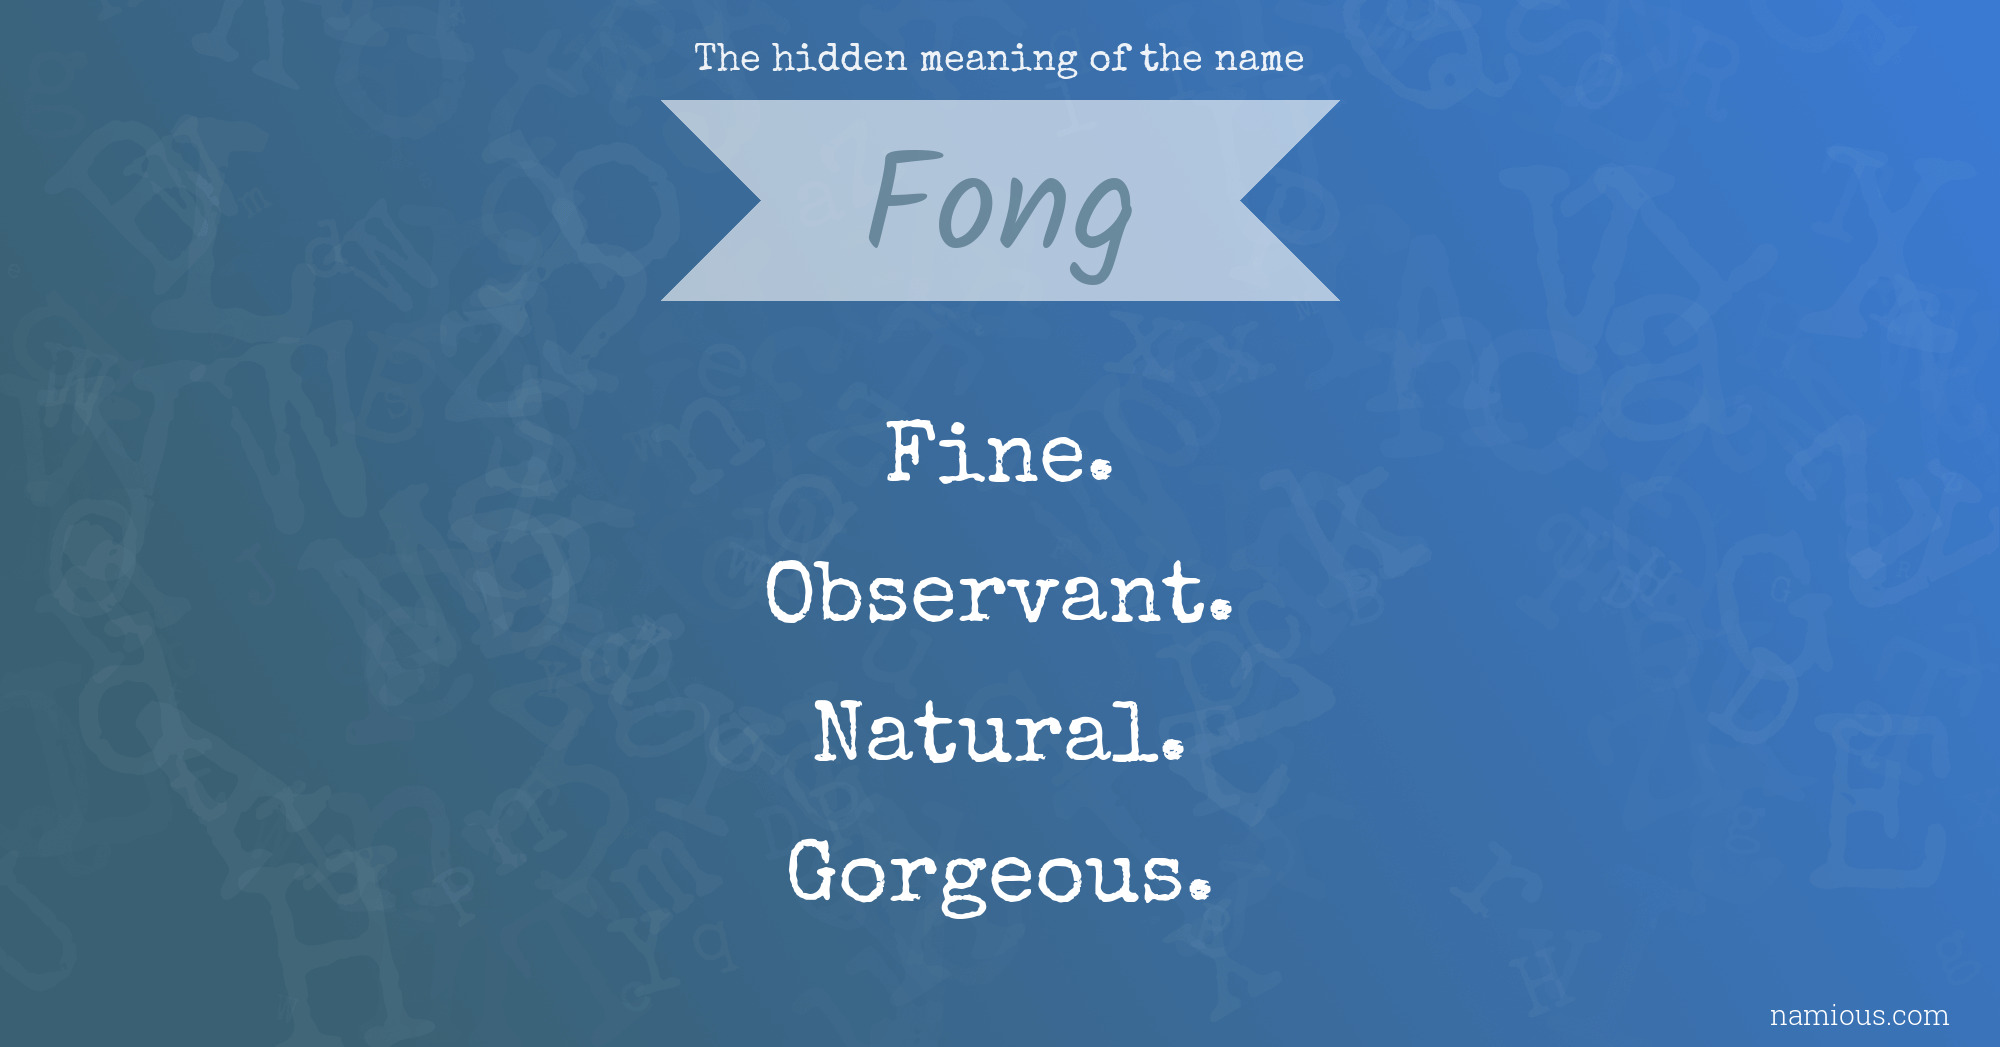 The hidden meaning of the name Fong